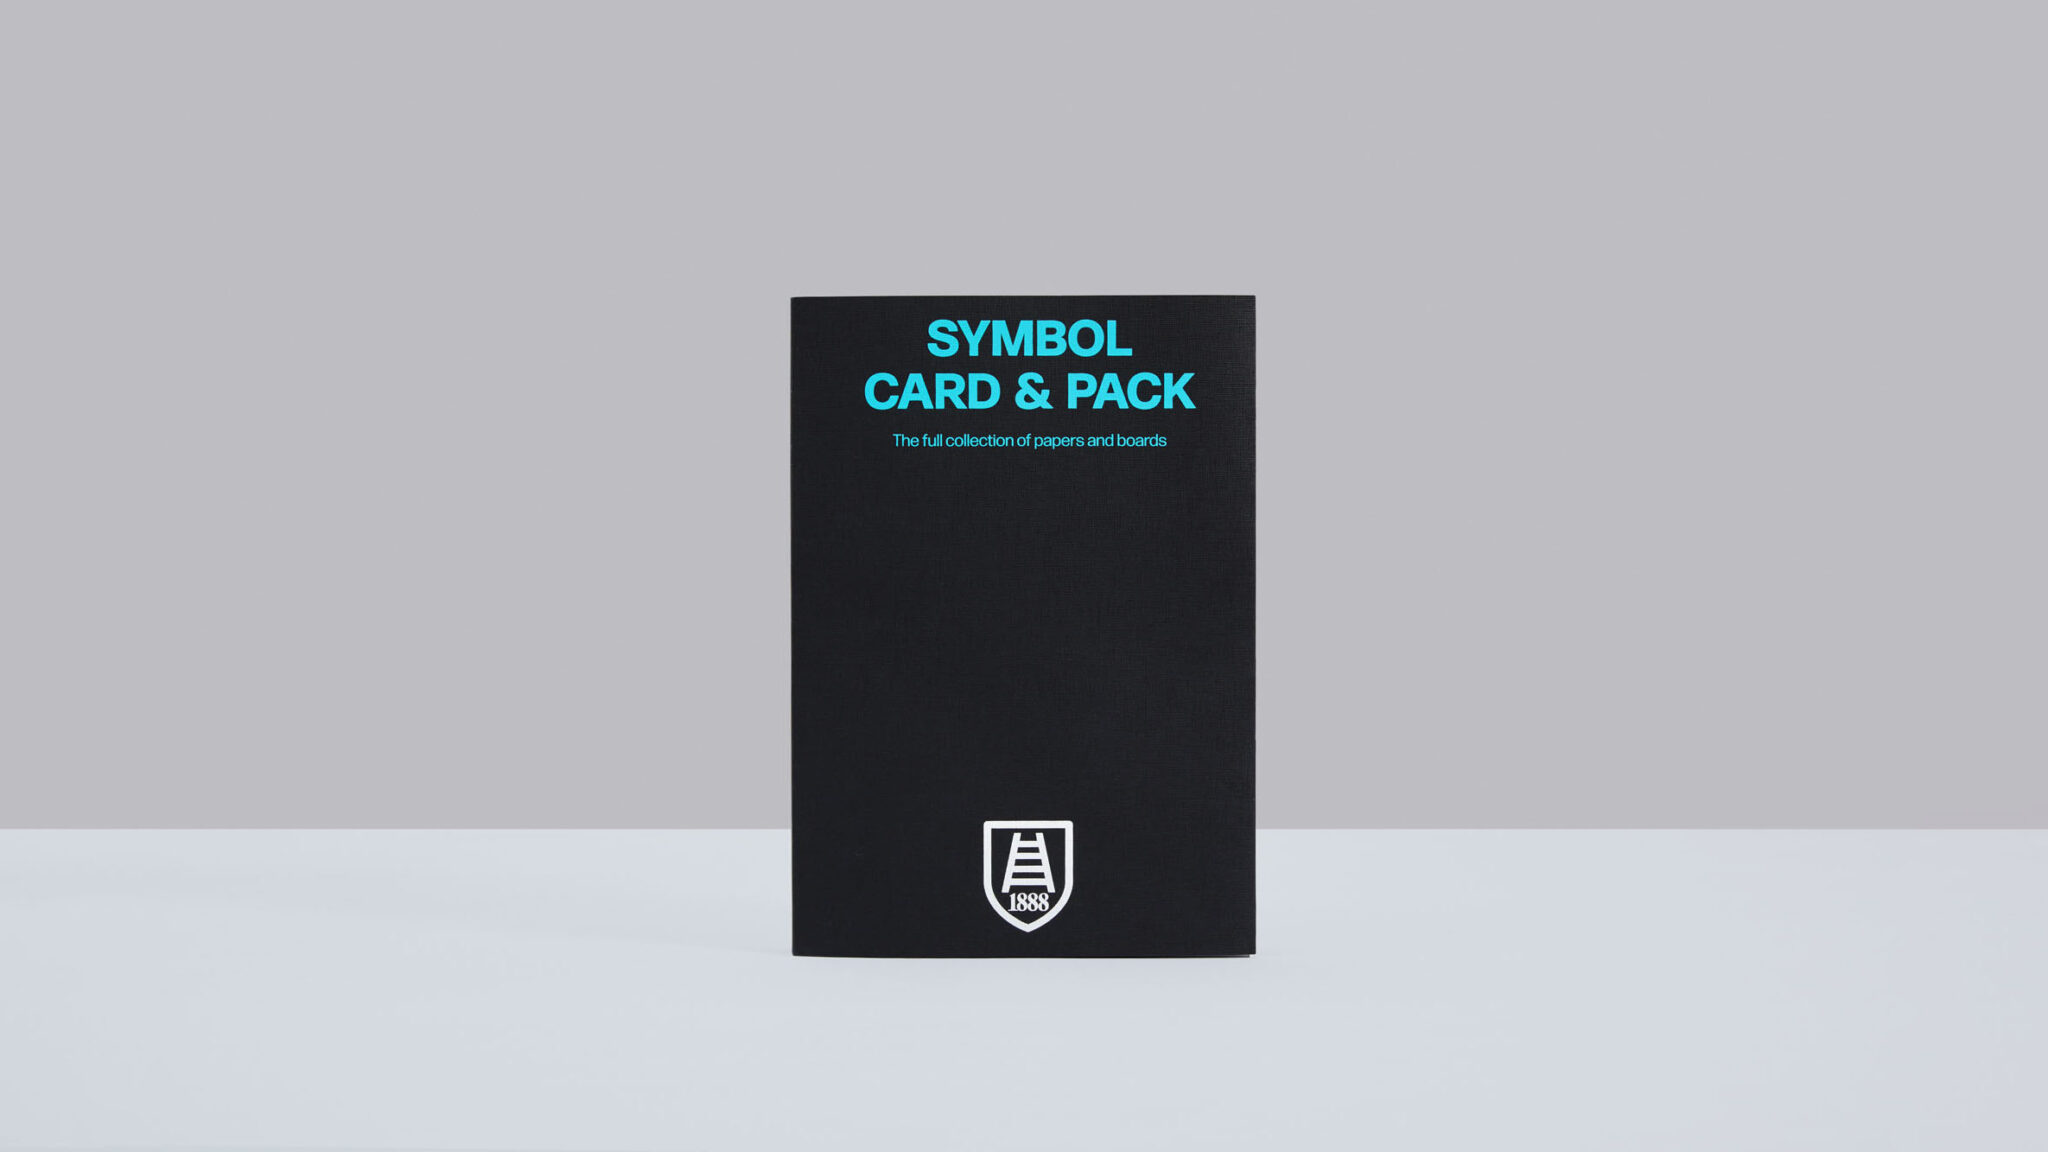 The whole Symbol Card&Pack range available in the new swatchbook